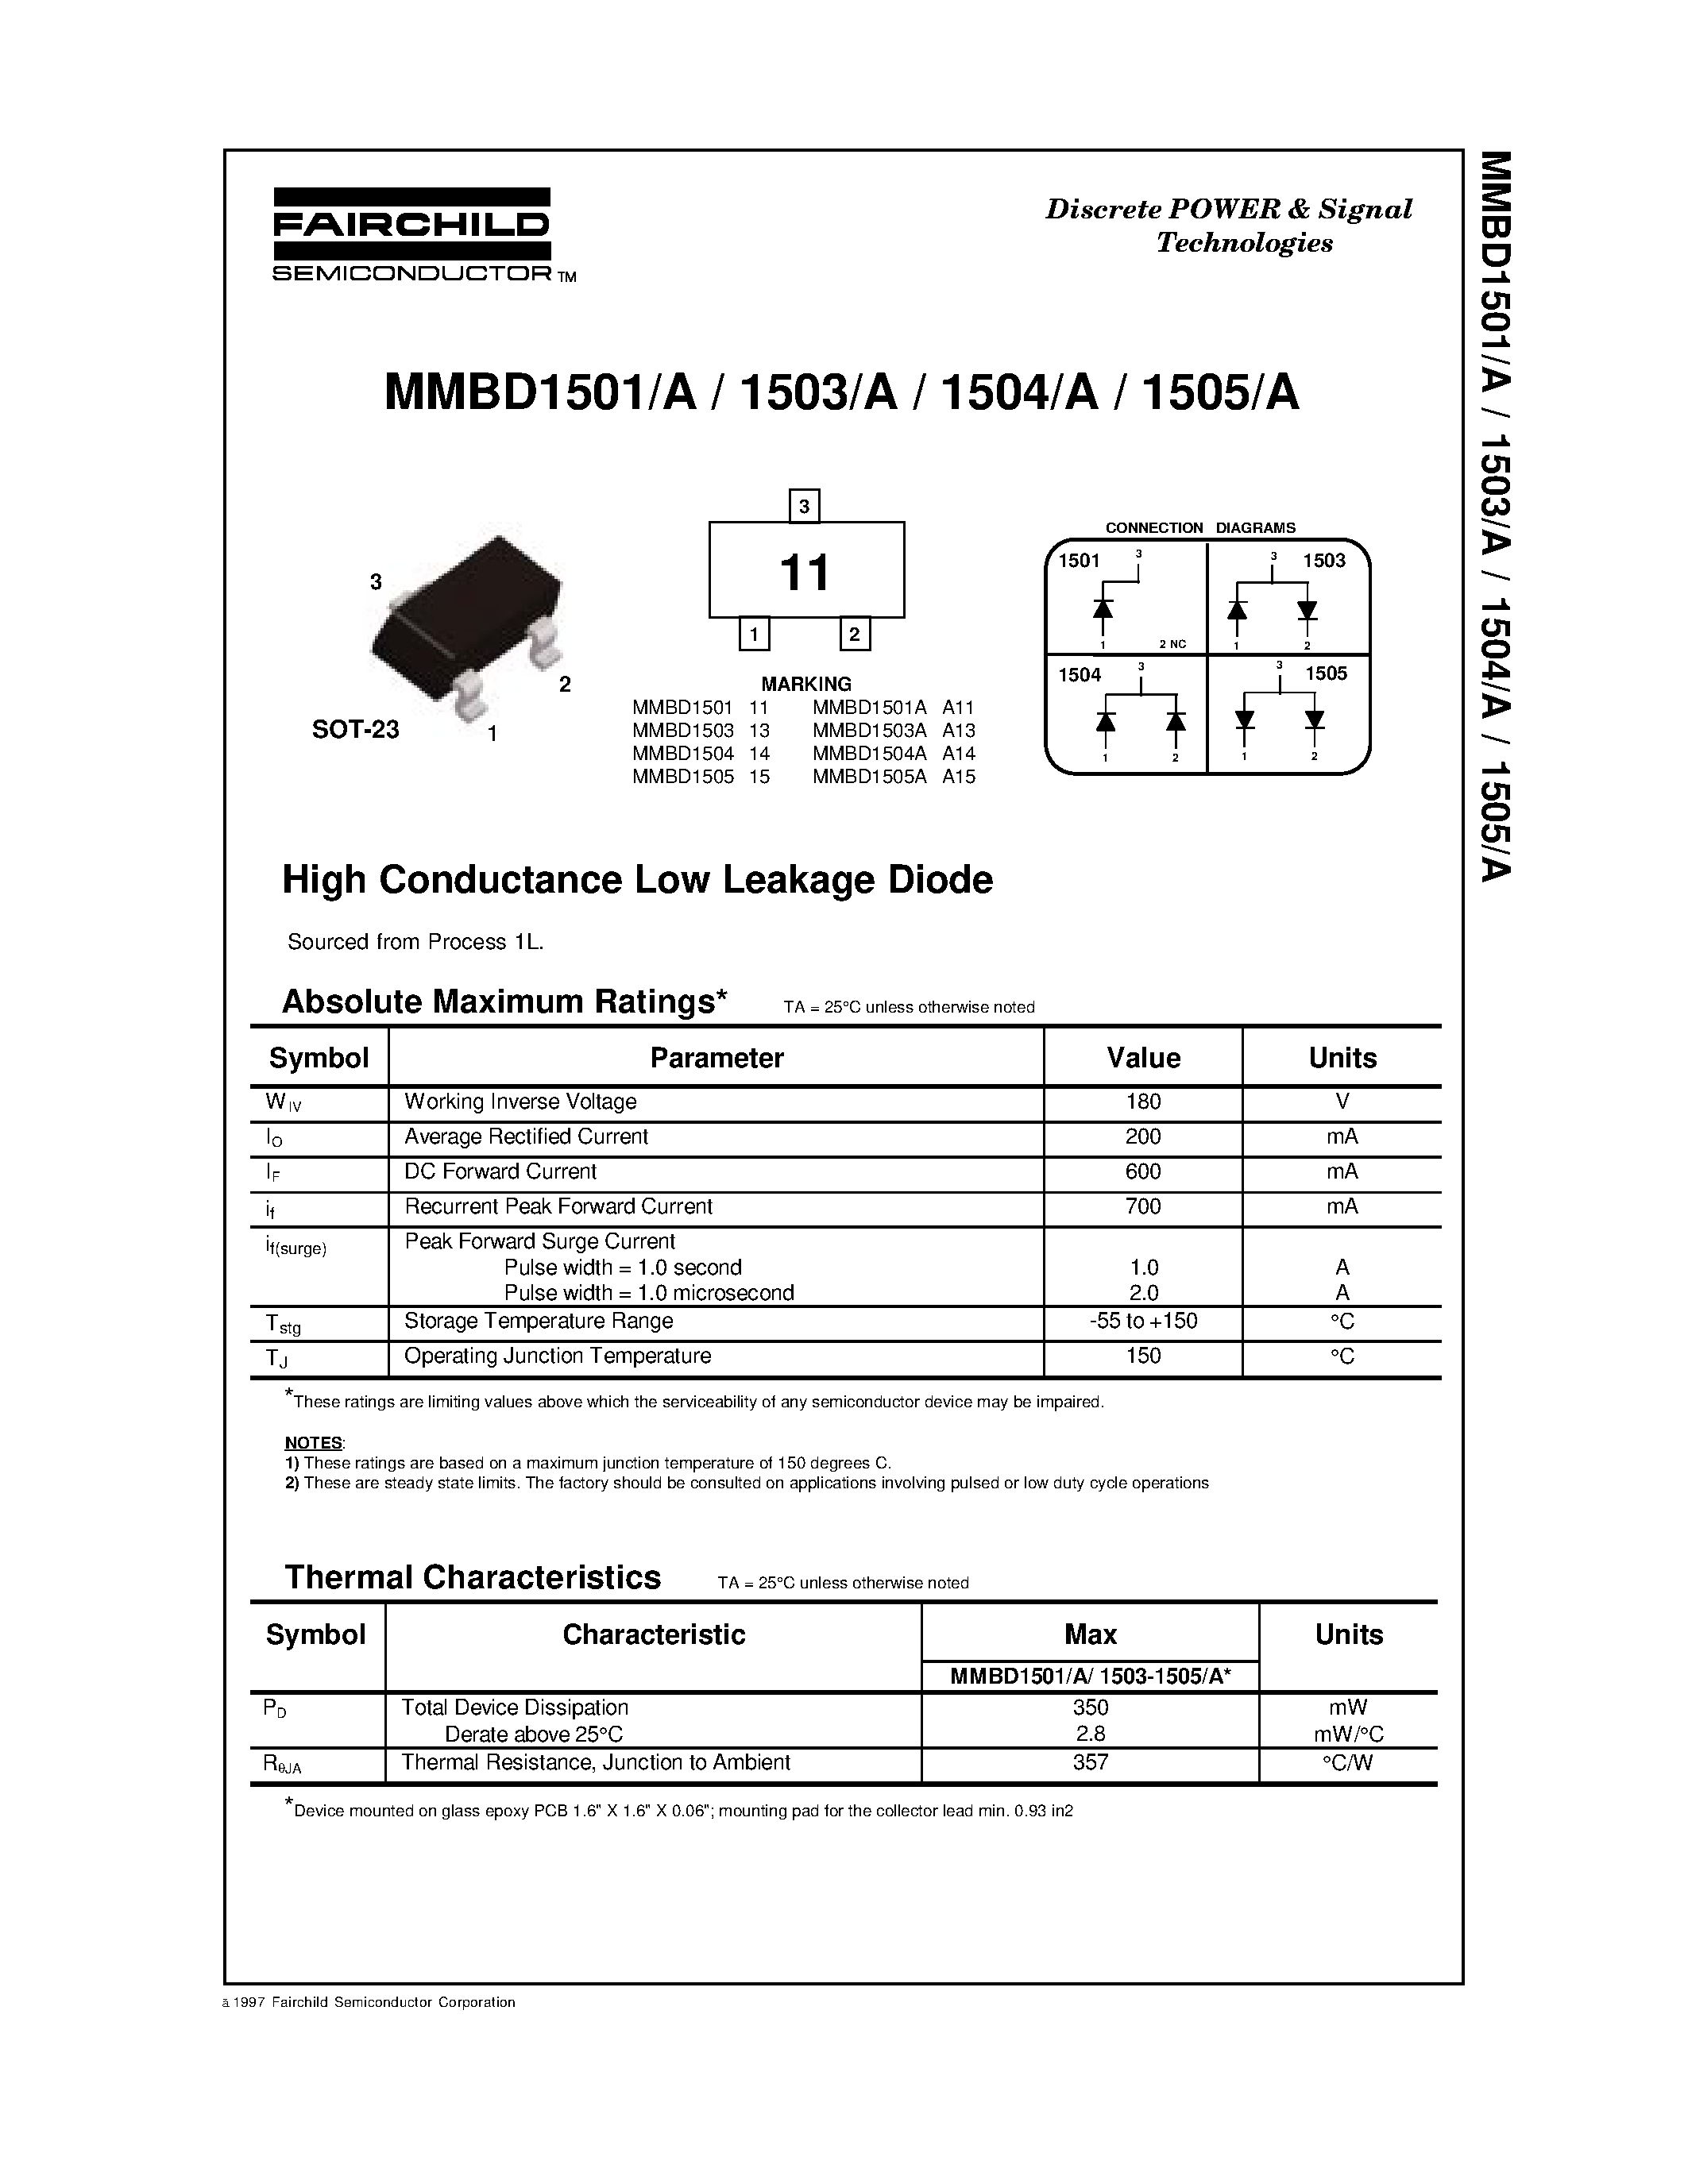 Даташит MMBD1503A - High Conductance Low Leakage Diode страница 1